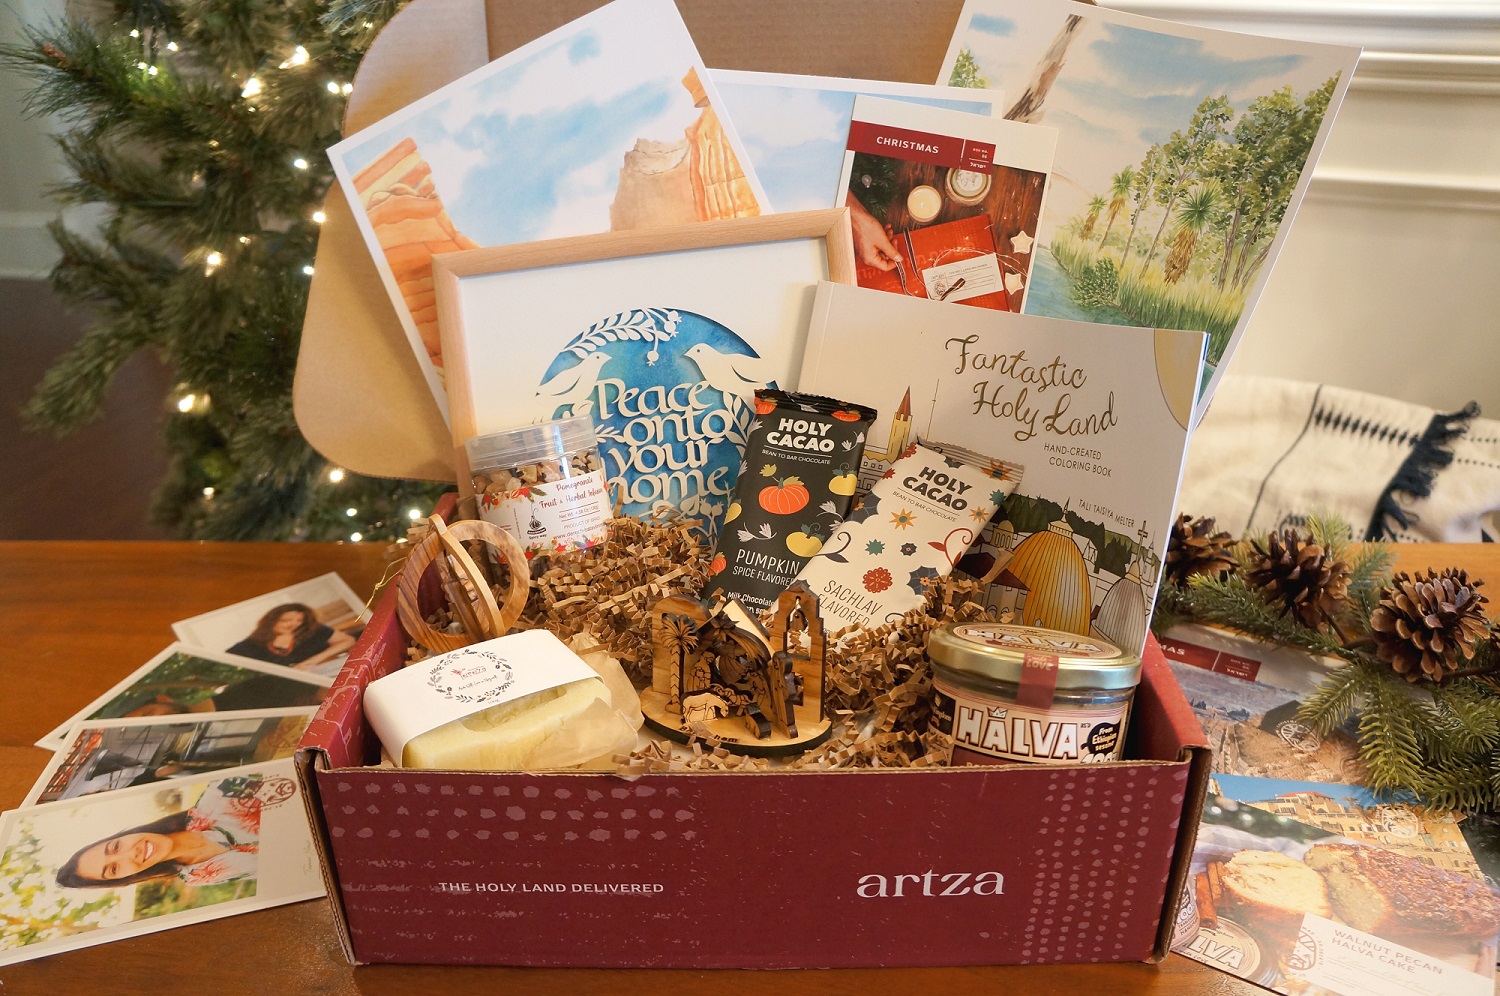 Open Artza Christmas box showing products and photographs of their artisans